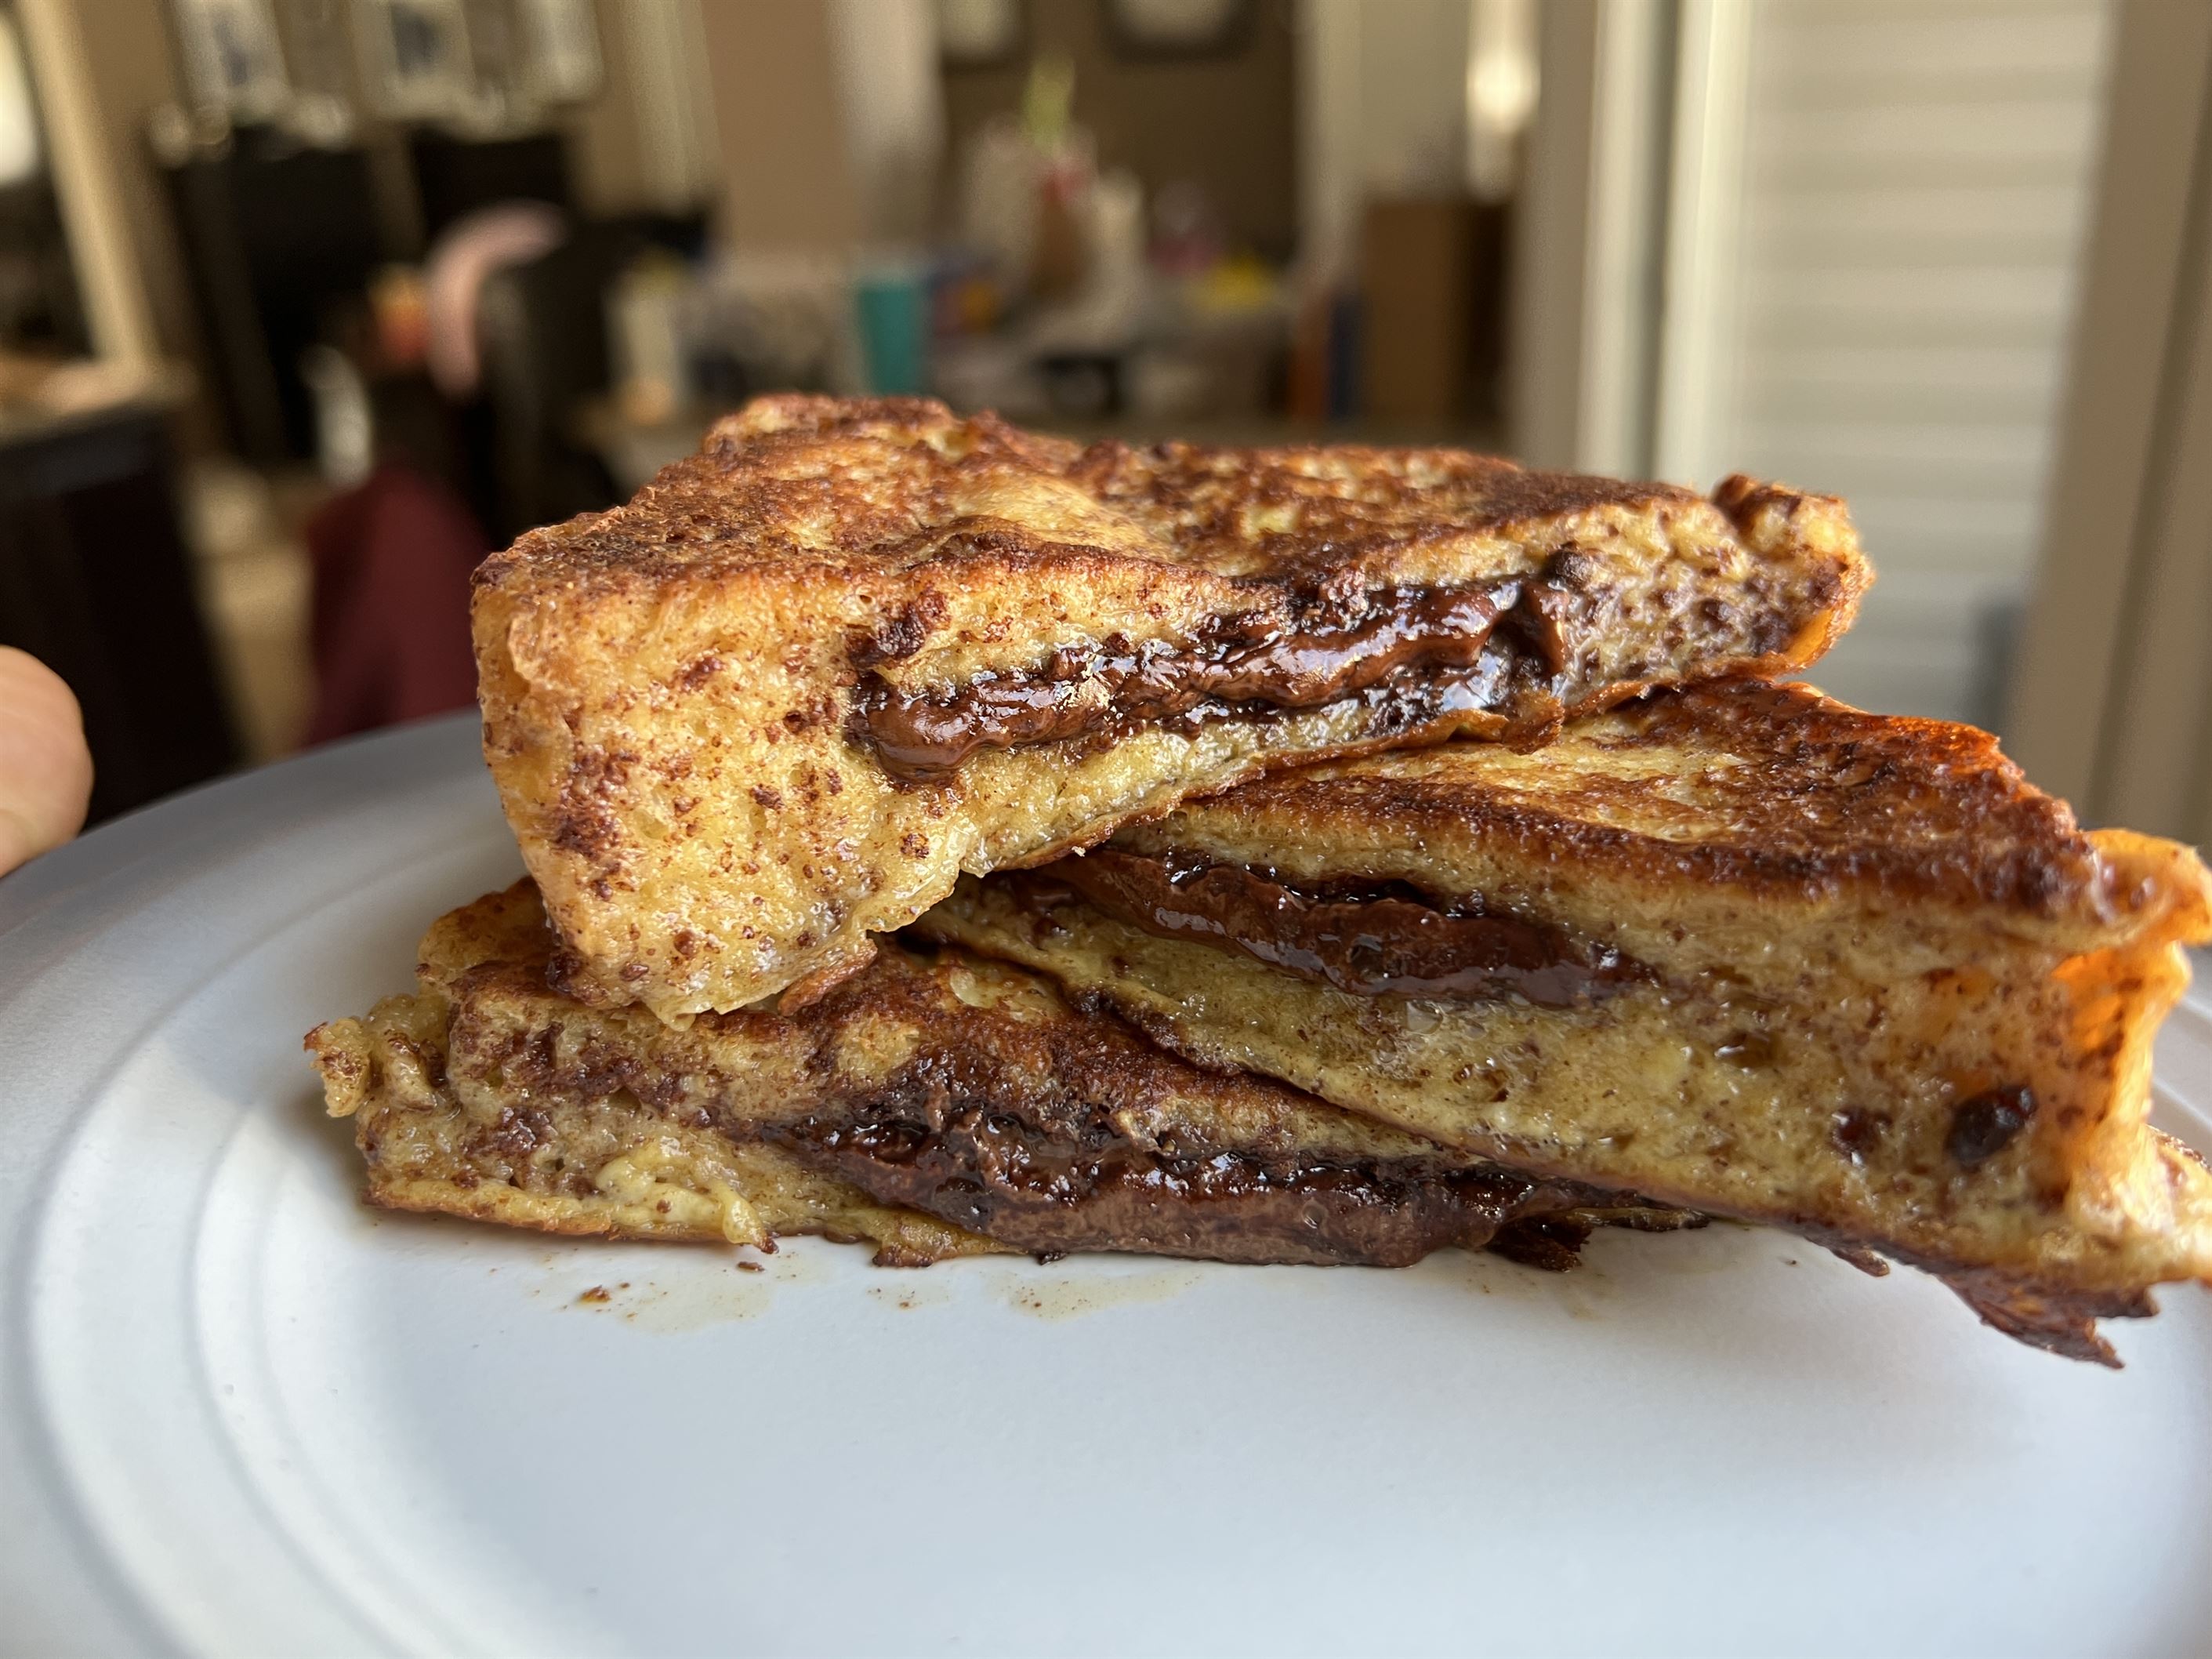 The best french toast has a golden brown, crisp outside and a gooey, warm inside. Samantha Bailey | The Montclarion